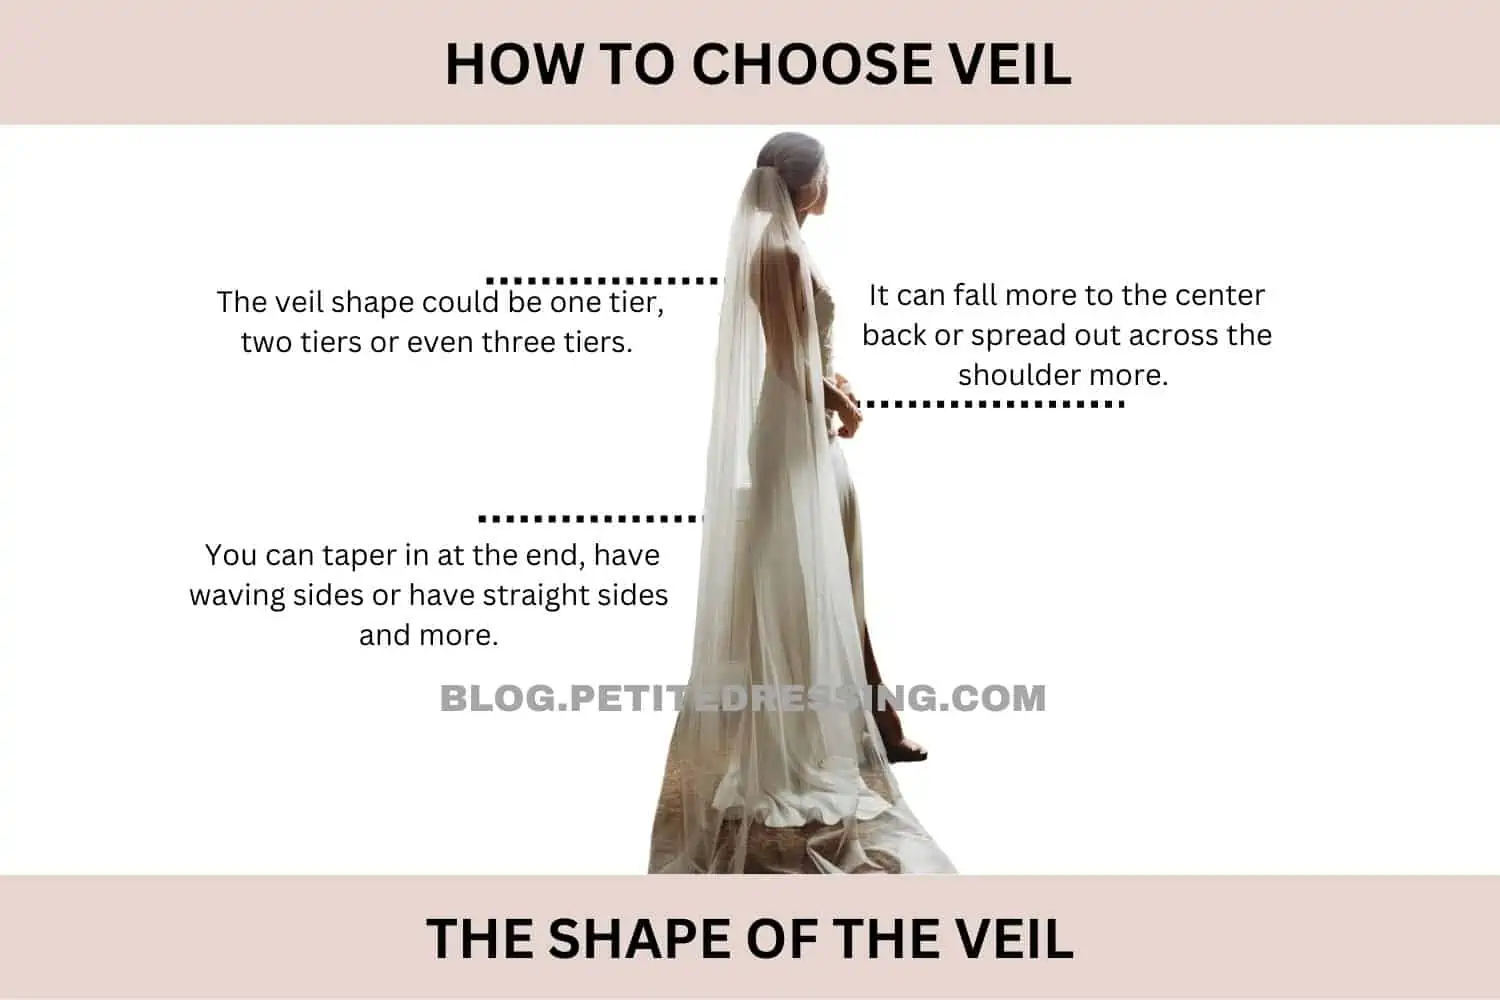 3 Considerations When Choosing The Right Types Of Wedding Veil